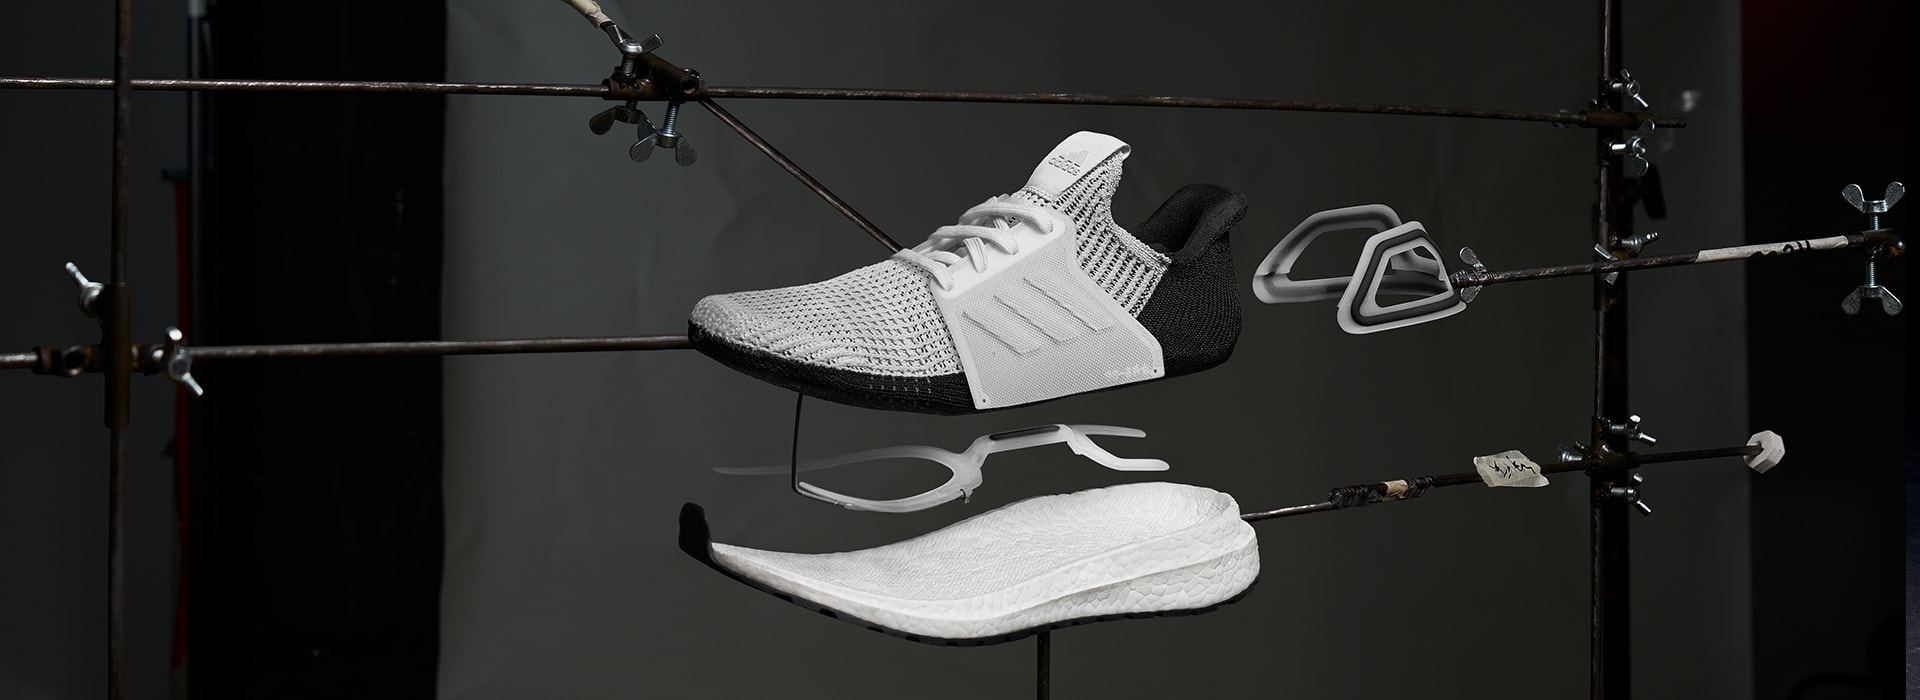 nmd ultra boost sizing